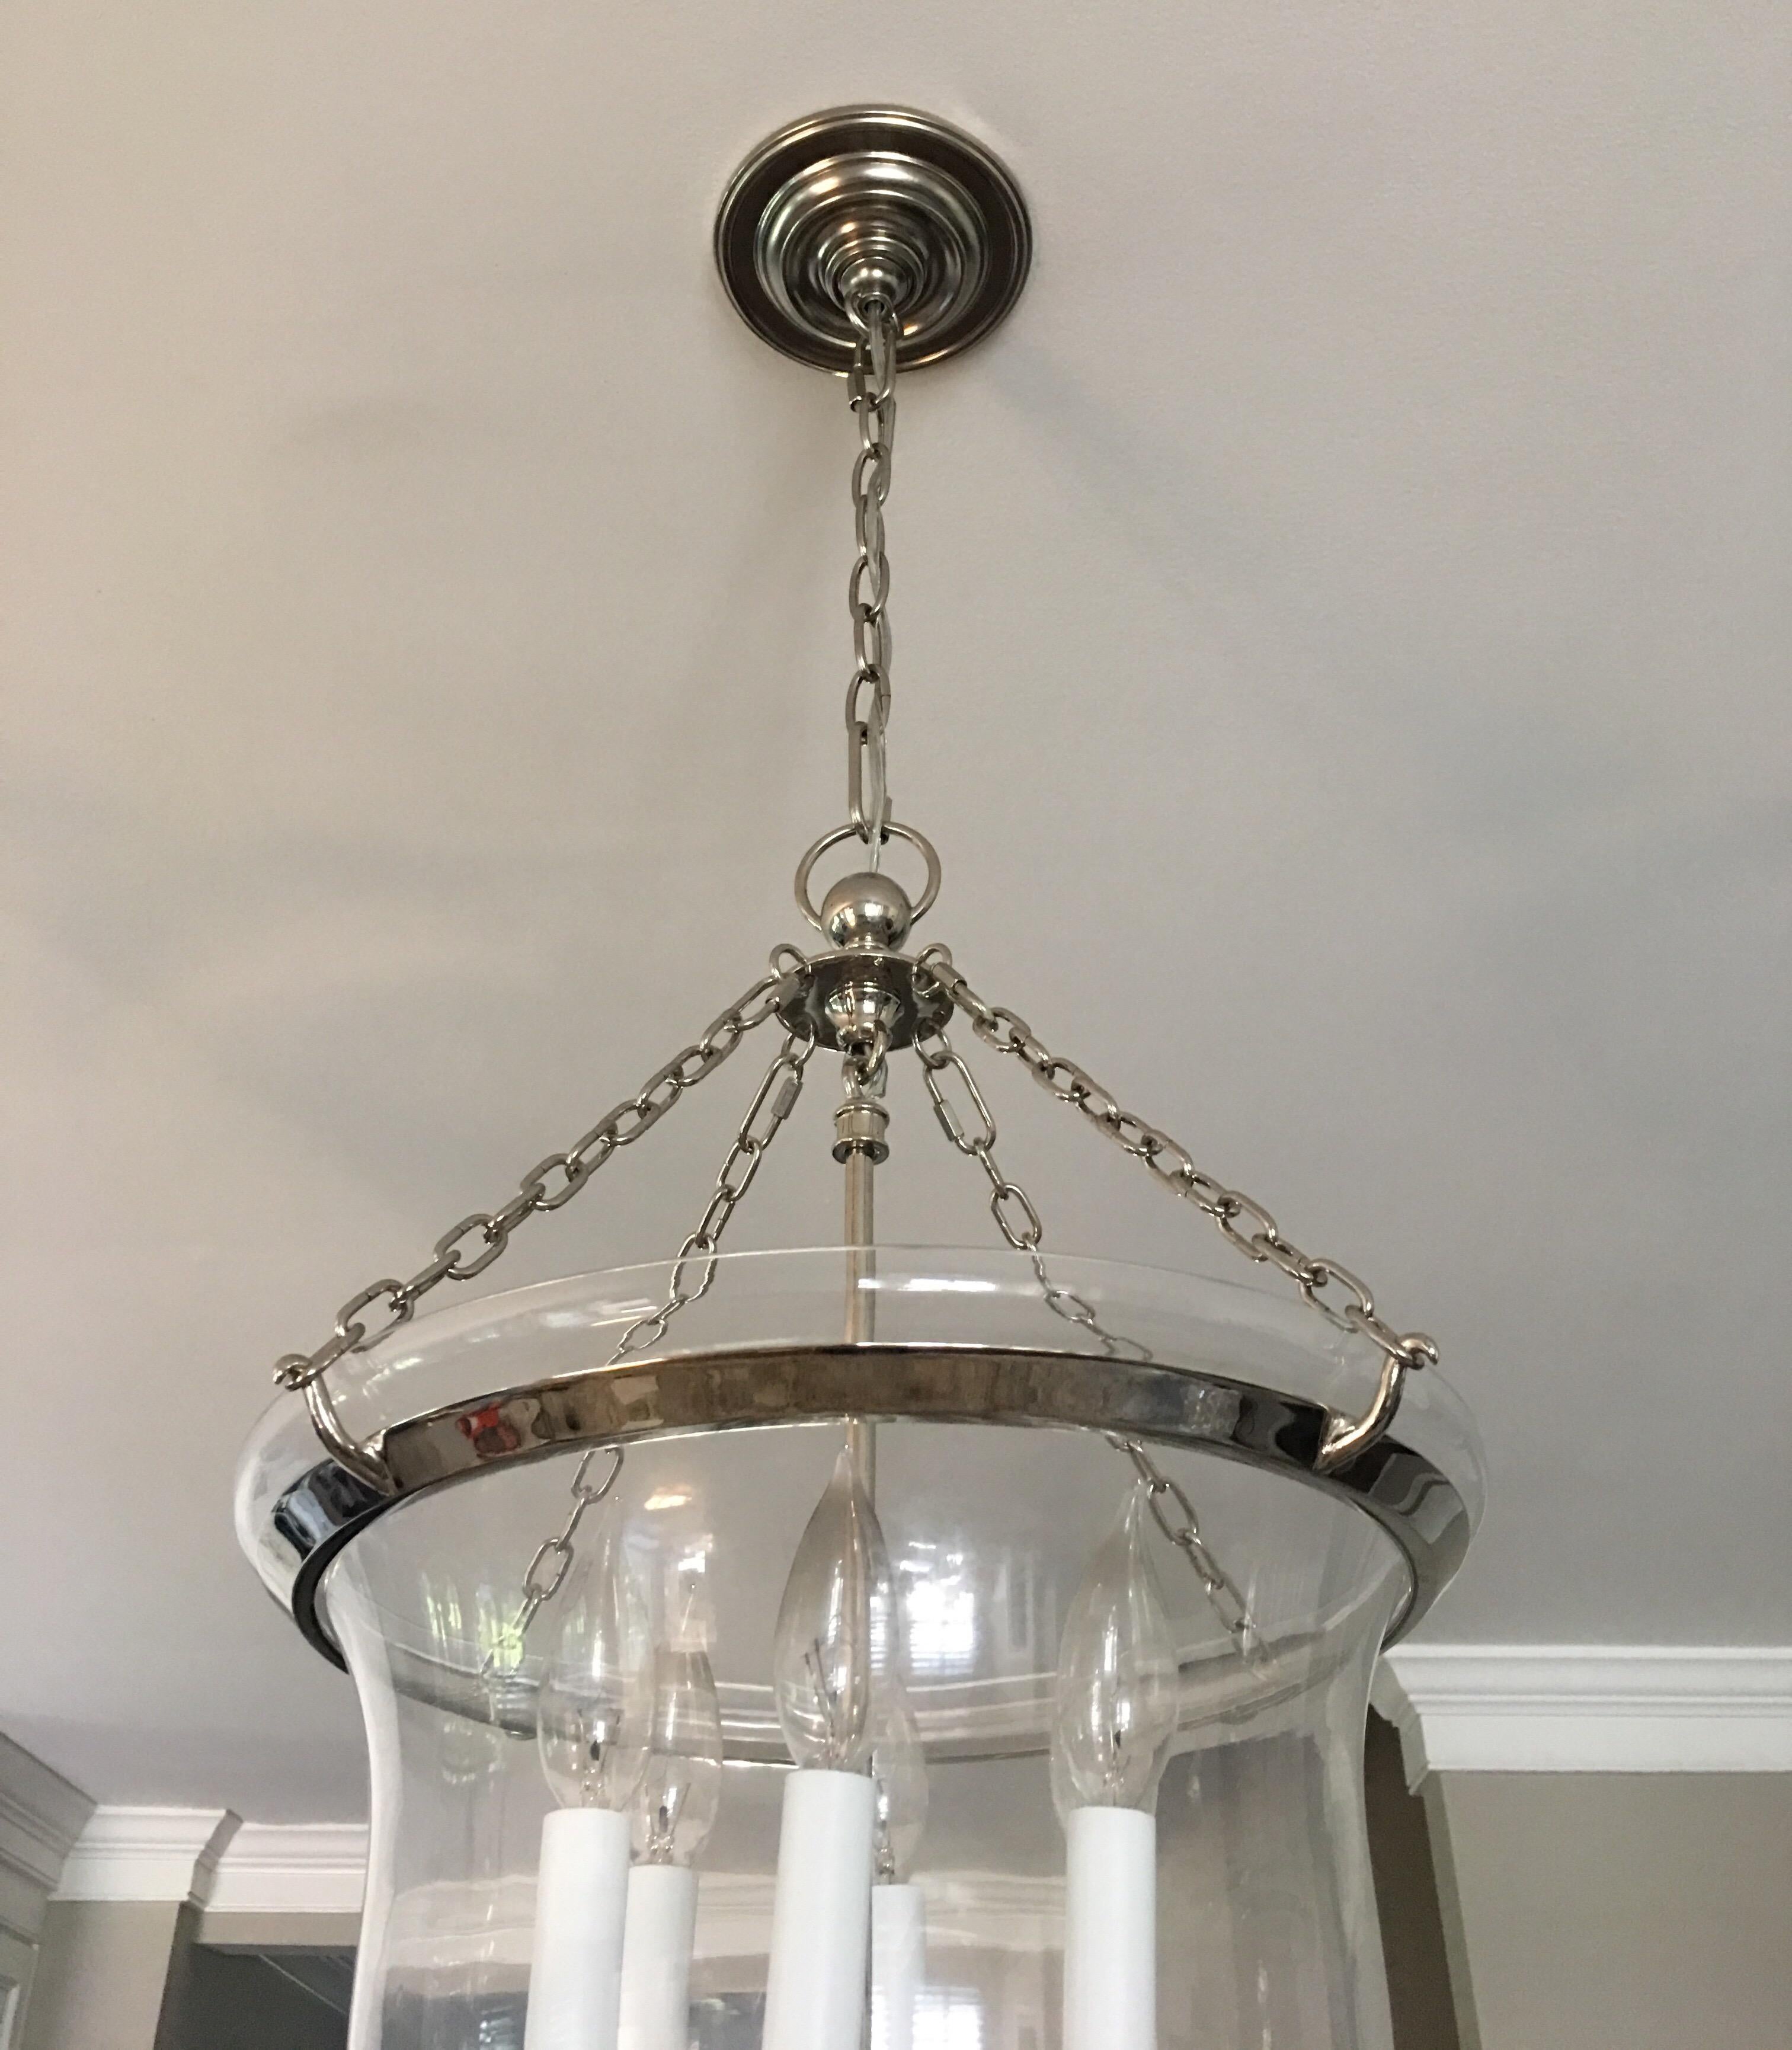 Classic bell jar chandelier light fixture by Chapman & Myers. Polished Nickel finish with removable clear glass bell jar. Six candle base bulbs. 60 watts per socket. Two lanterns available for purchase. 

Fixture is 21 Inches long from bottom of